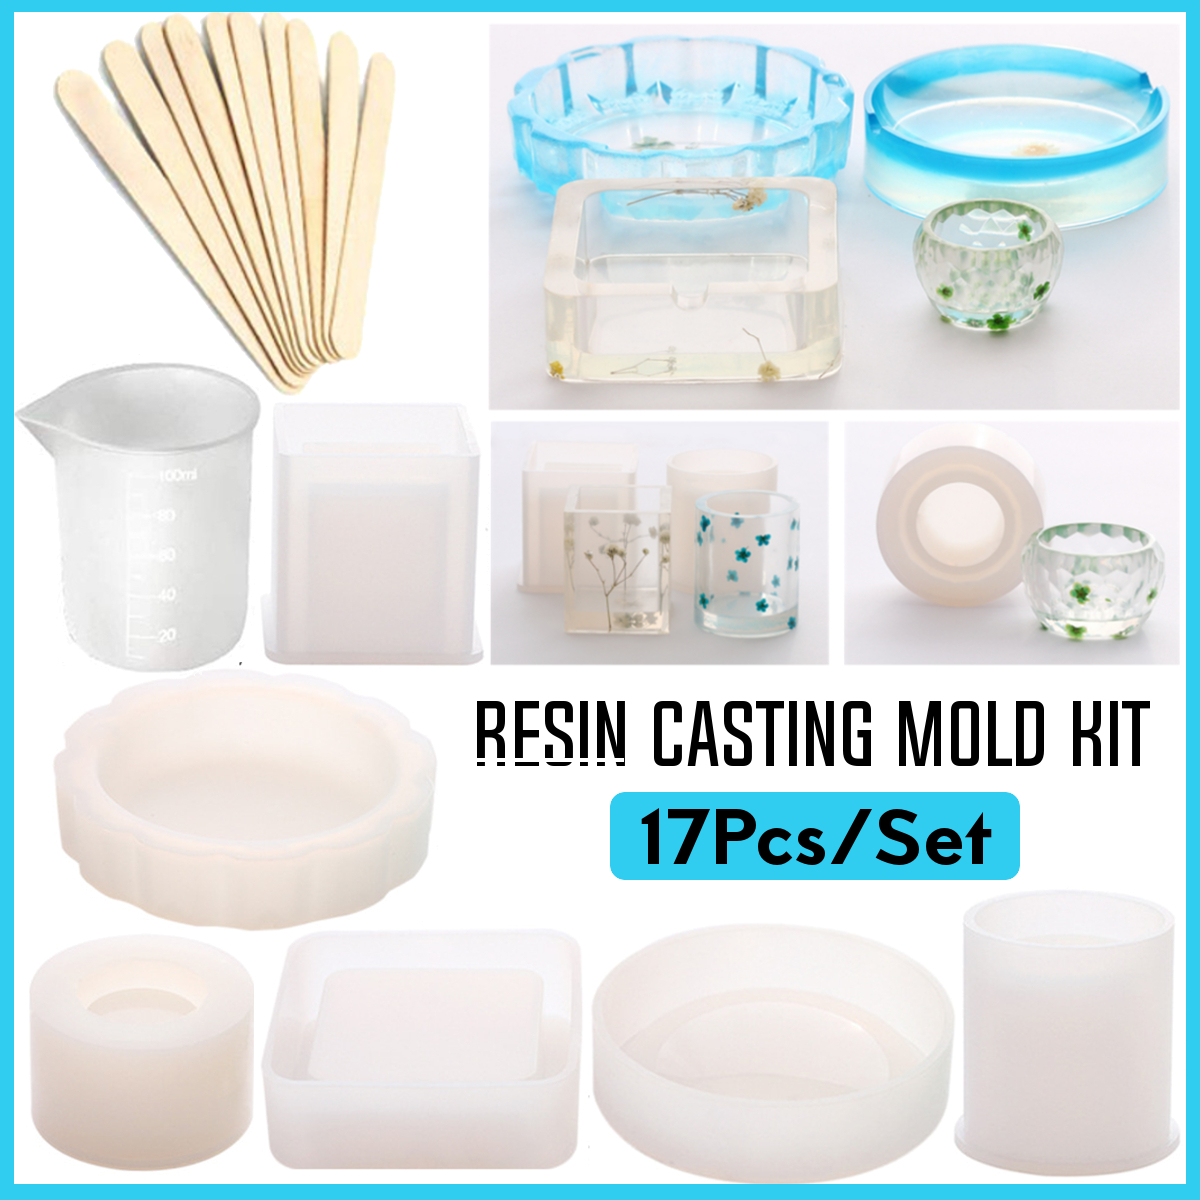 17Pcs-DIY-3D-Geometric-Epoxy-Resin-Casting-Molds-Kit-Silicone-Mould-Jewelry-Pendant-Craft-Making-Too-1651104-1